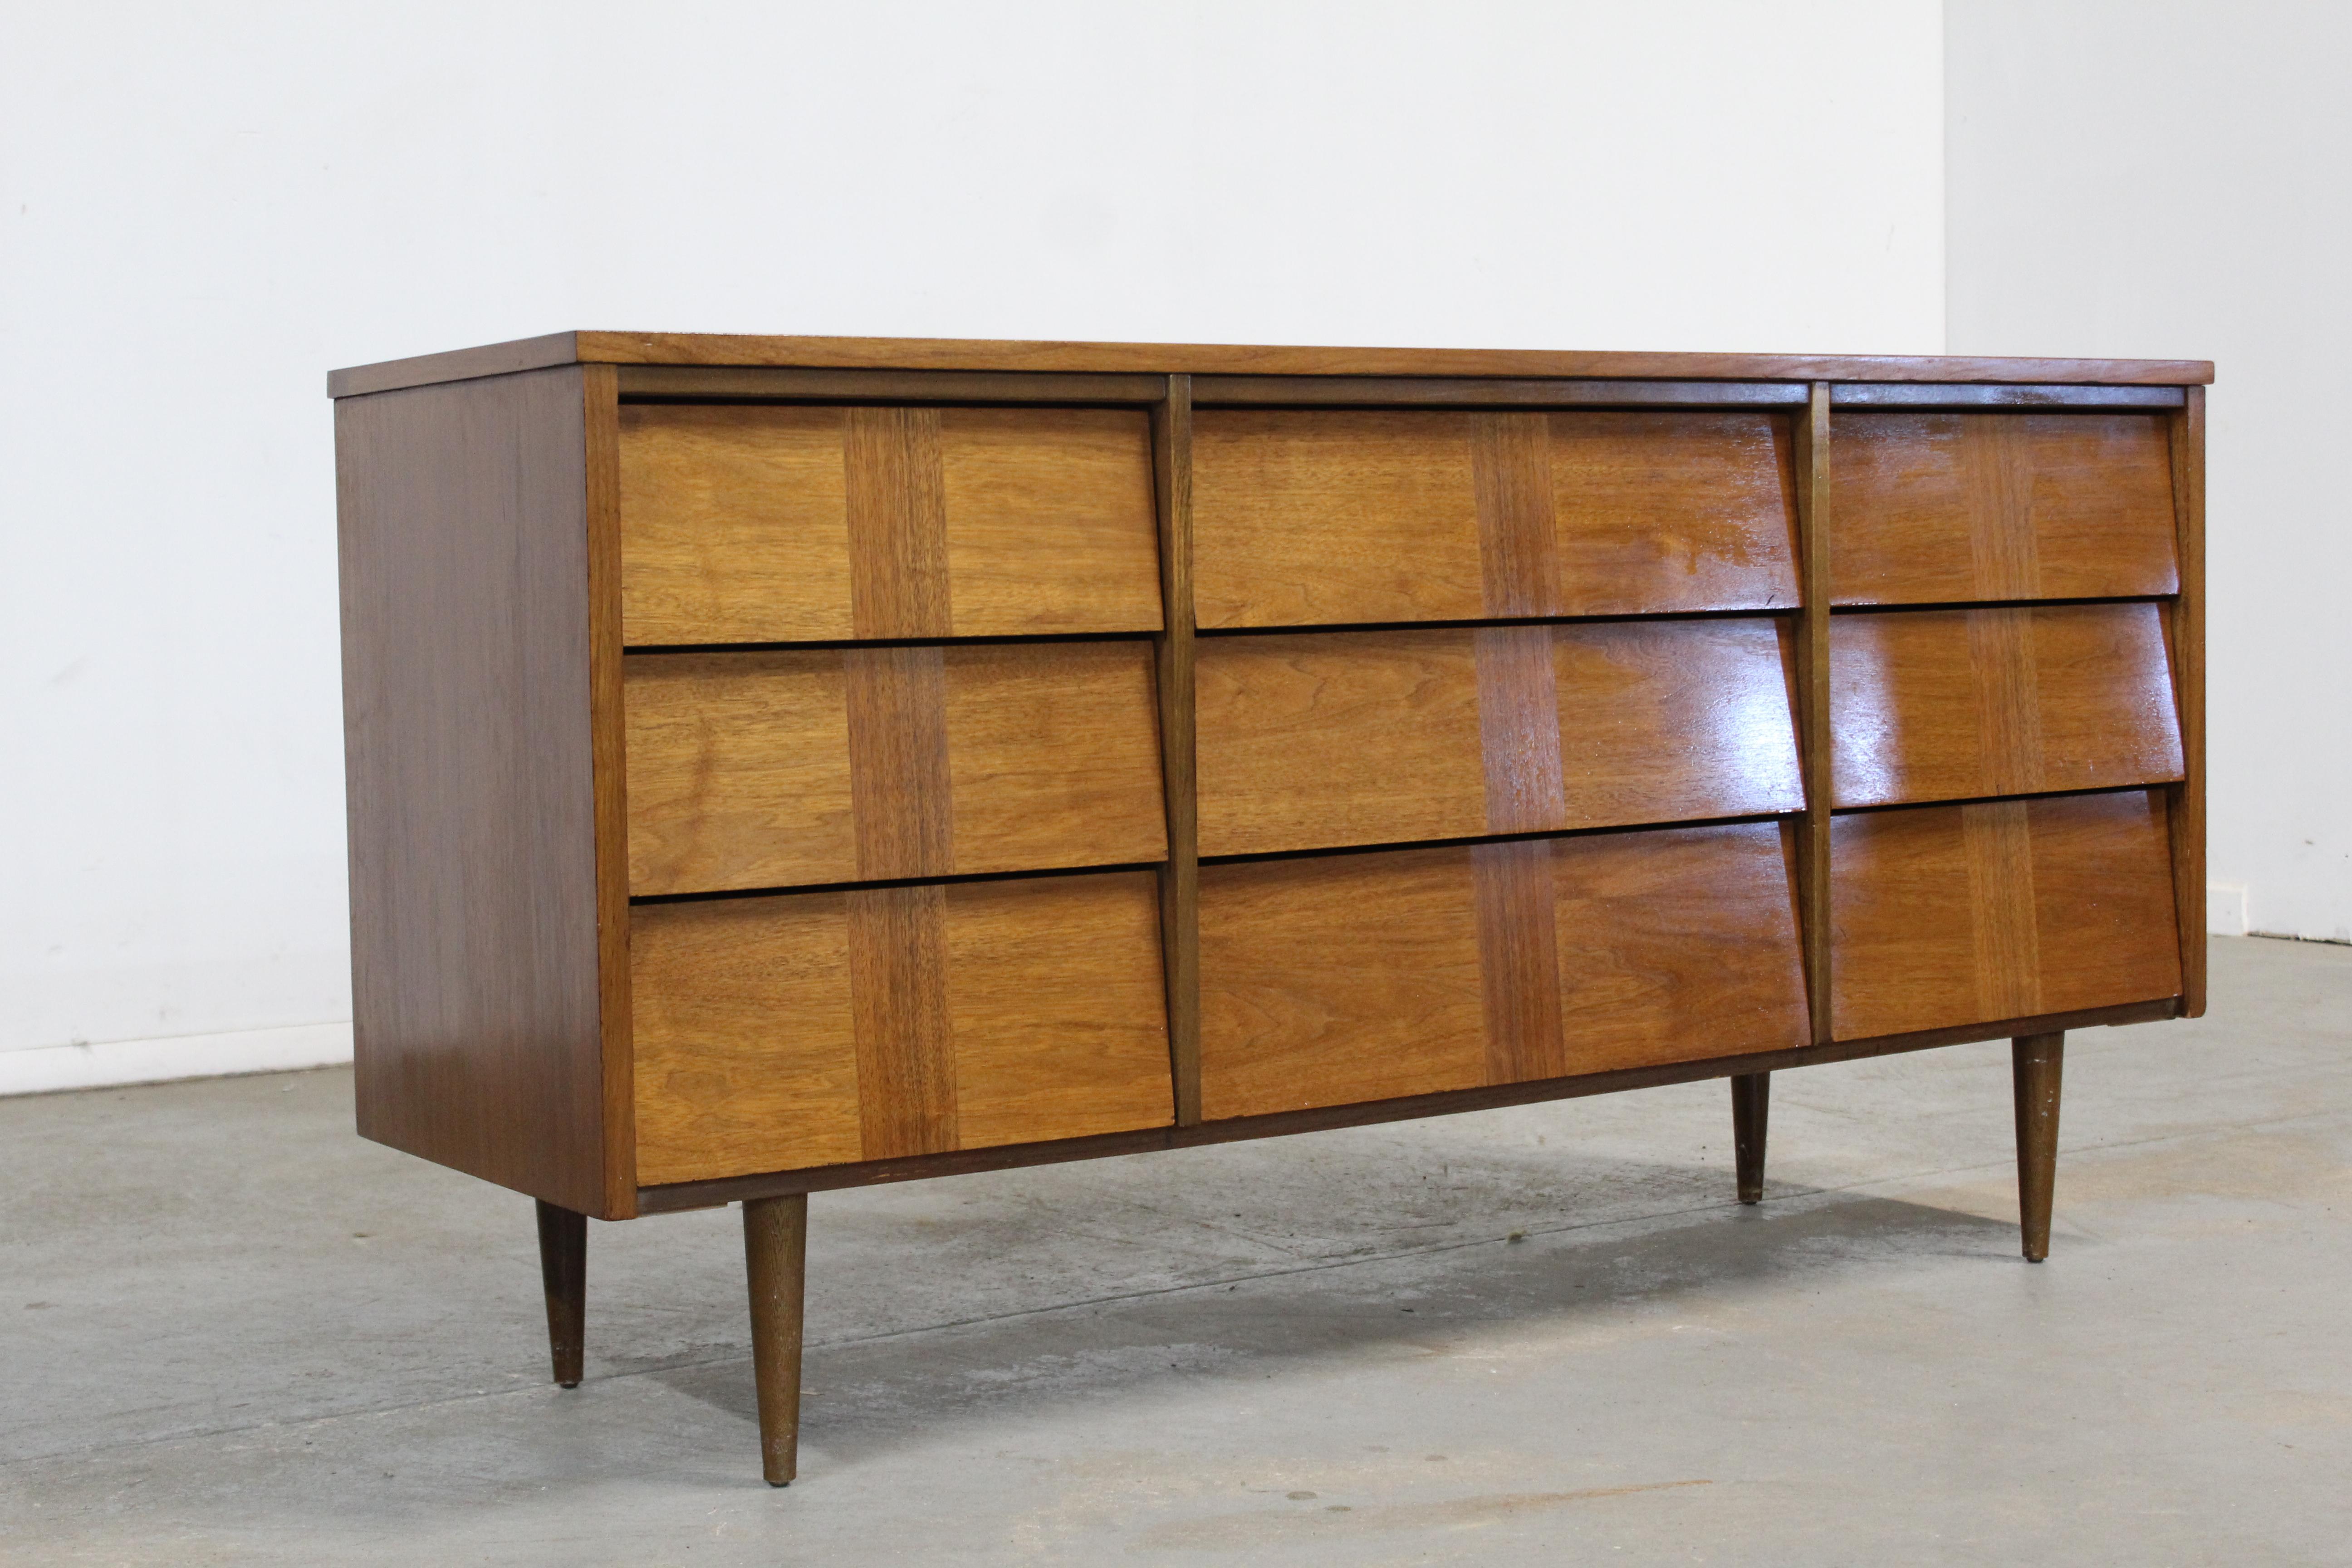 Mid-Century Modern walnut credenza / dresser on pencil legs.
Offered is a beautiful Mid-Century Modern walnut credenza / dresser with ample storage space, by ward Furniture. Features 9 drawers with in laid Walnut. The piece has hidden drawer pulls